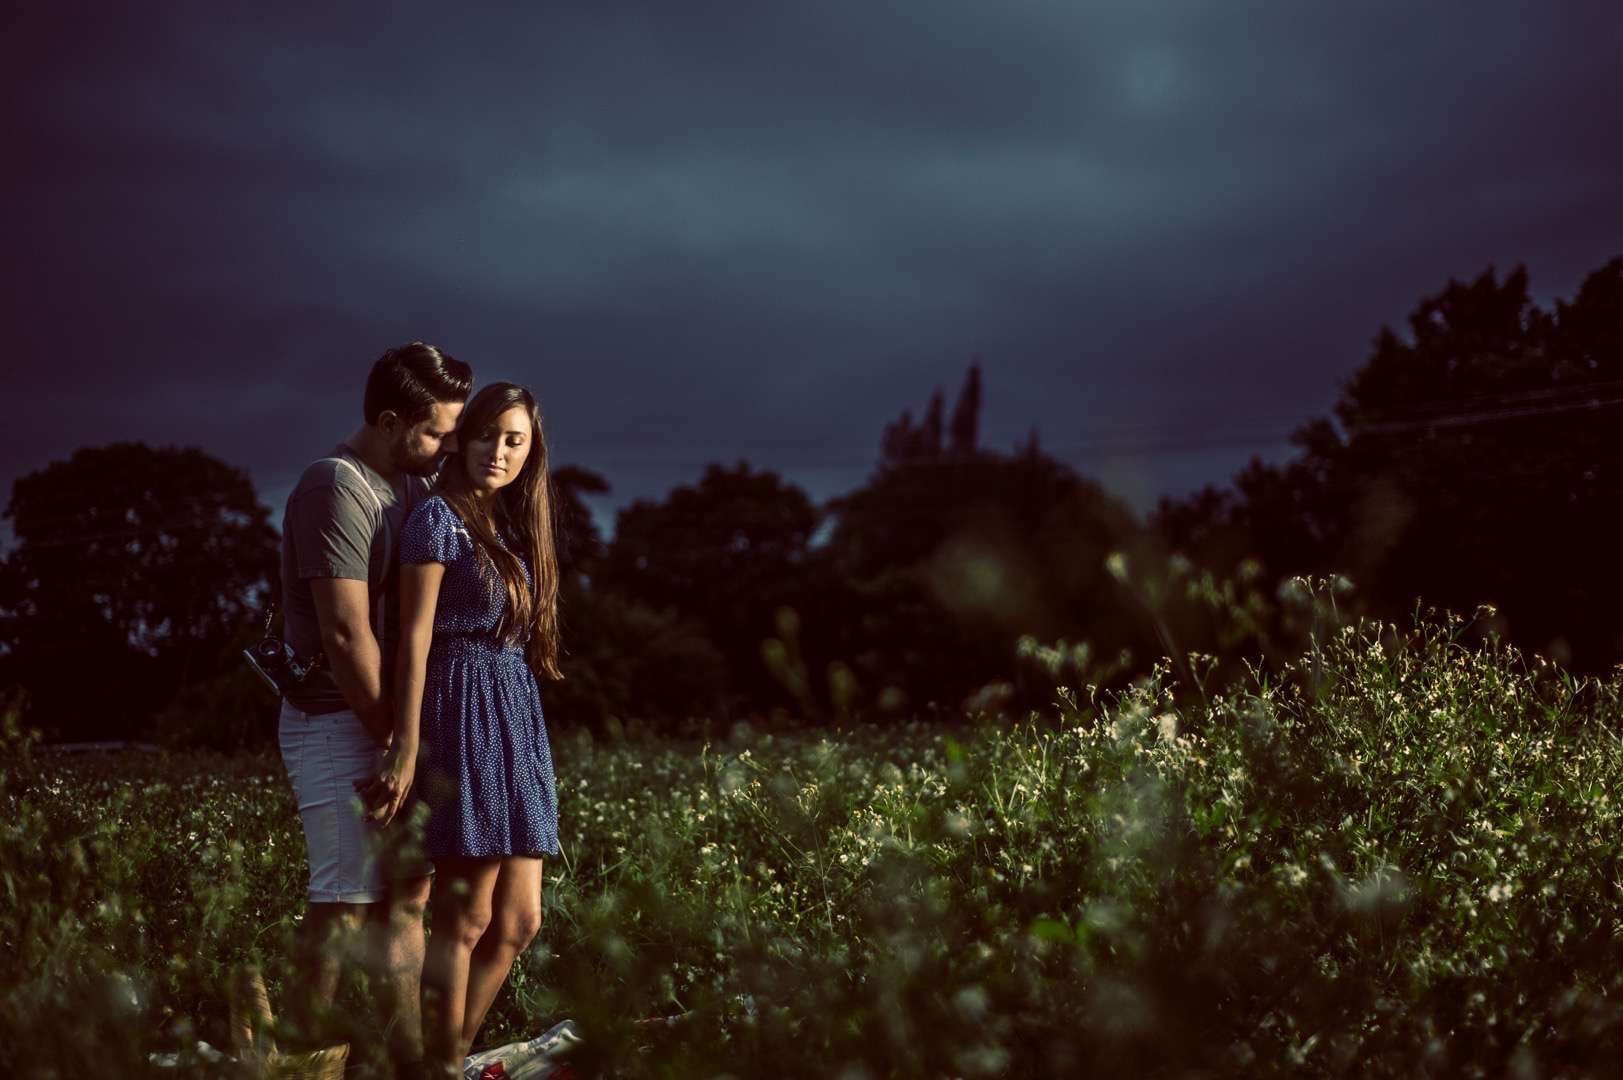 Man embracing a woman from behind in a field at night